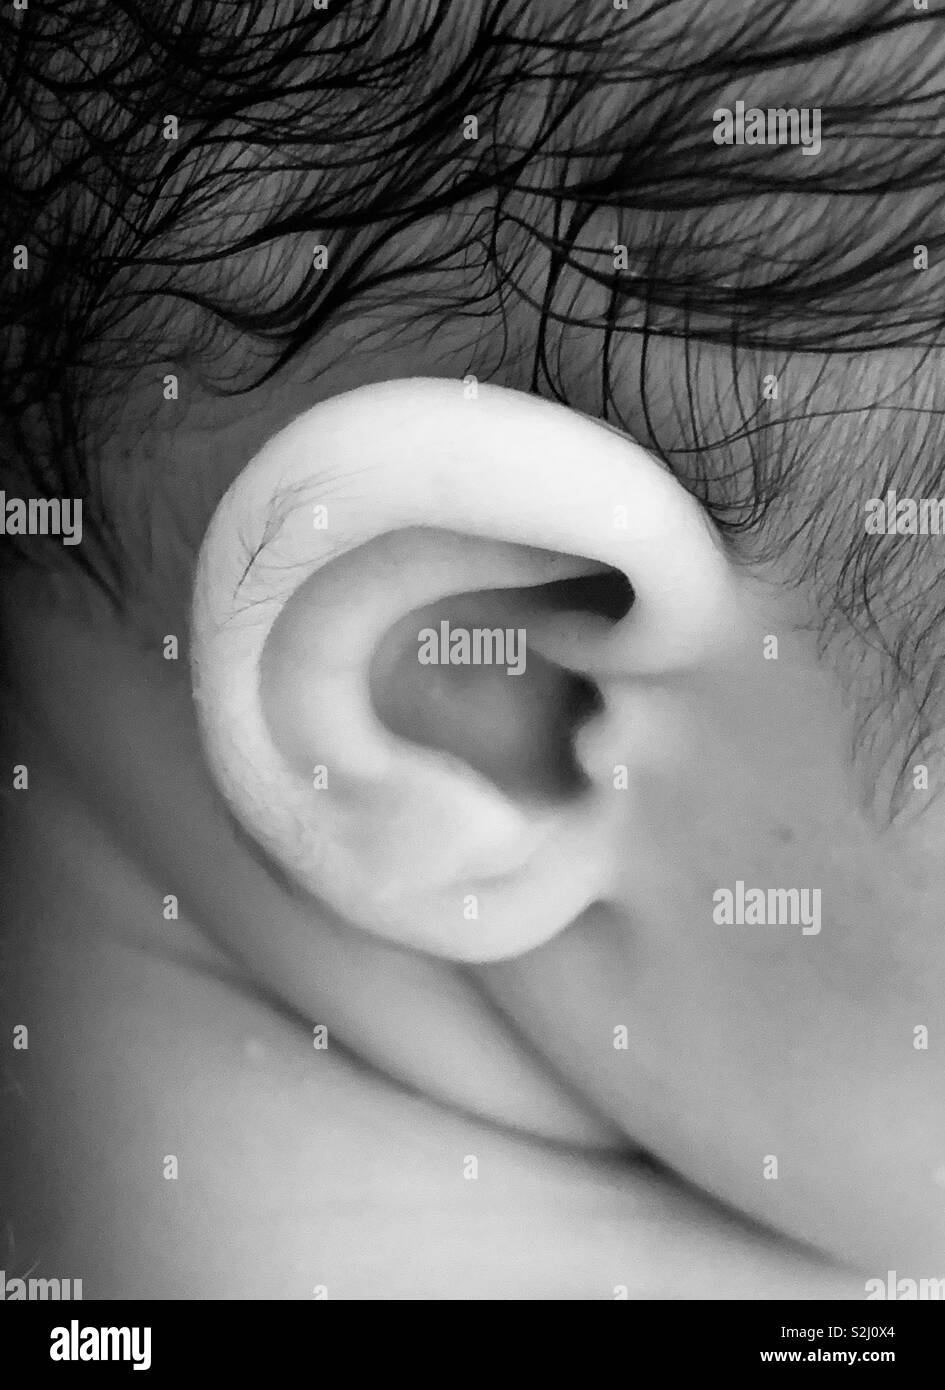 A 5 month old baby girl’s ear in black and white Stock Photo